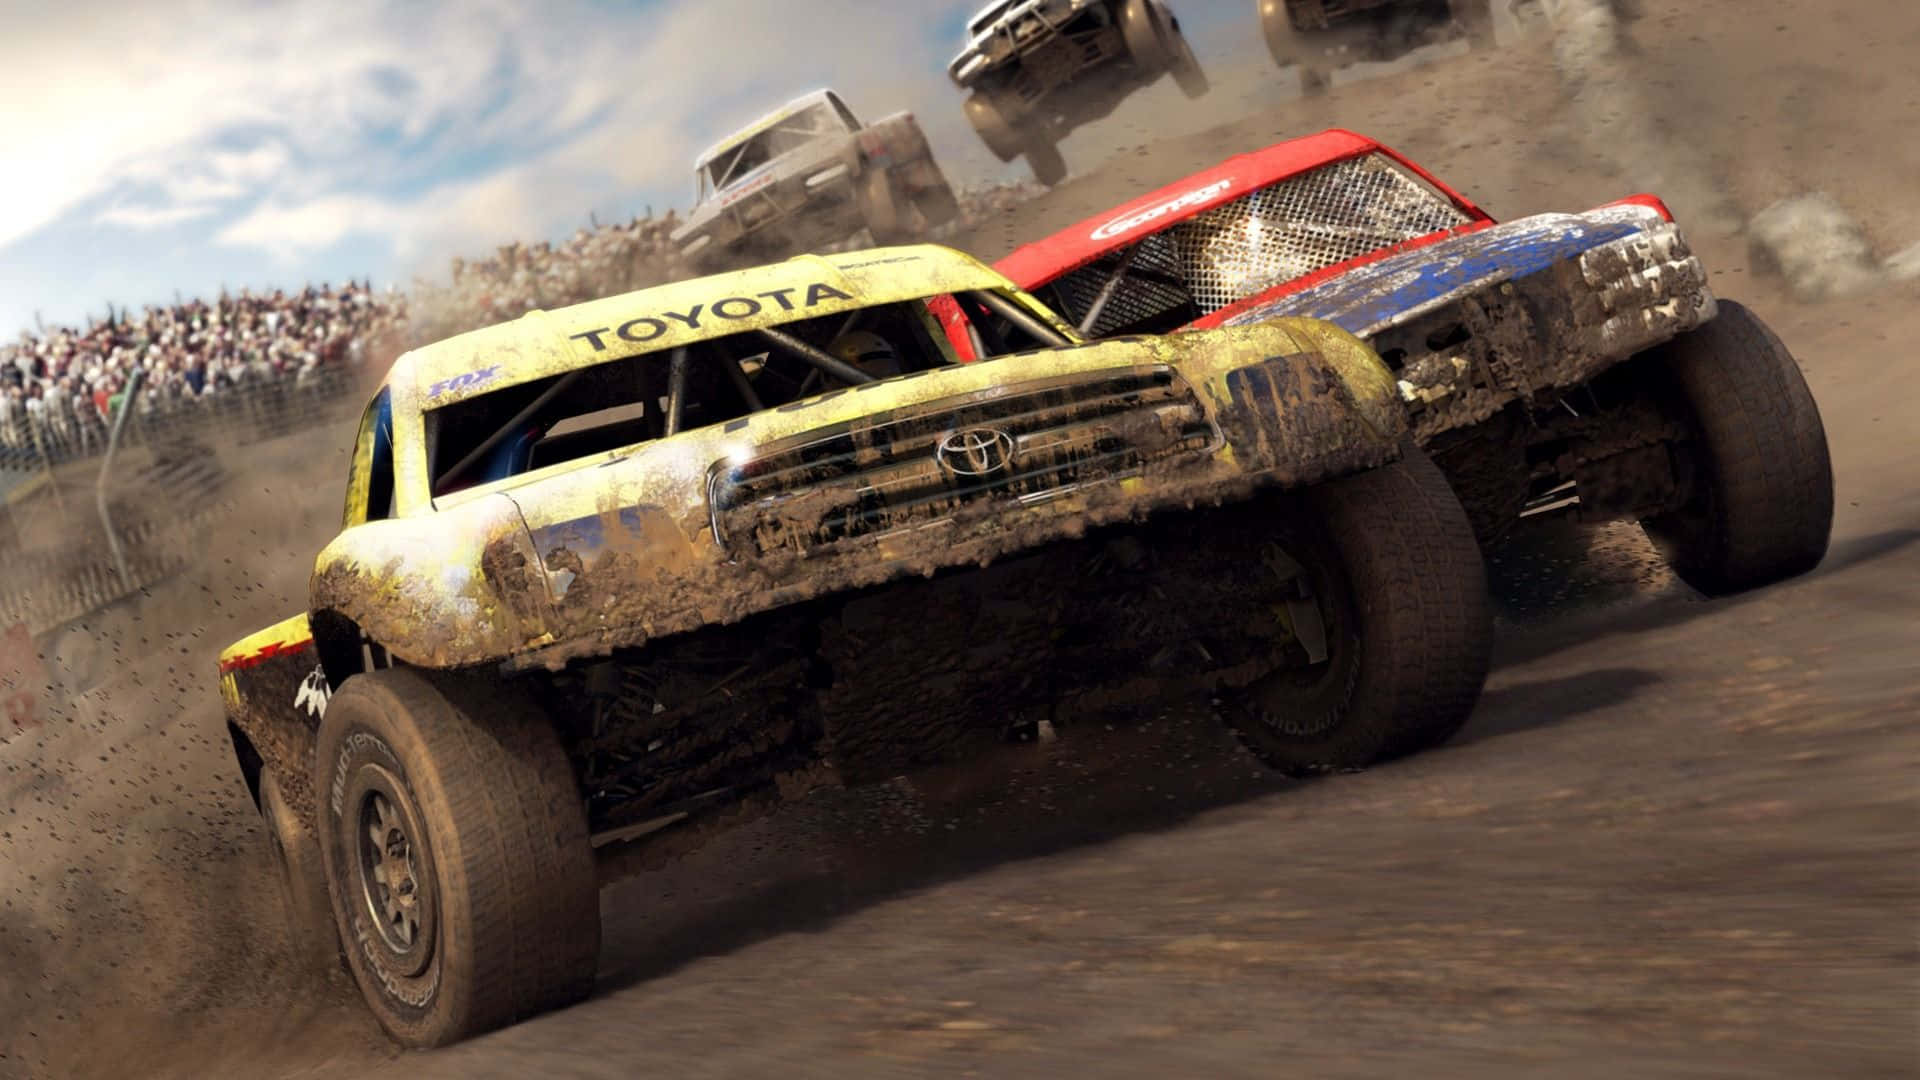 Dirt Racing - A Game With Two Trucks Racing On Dirt